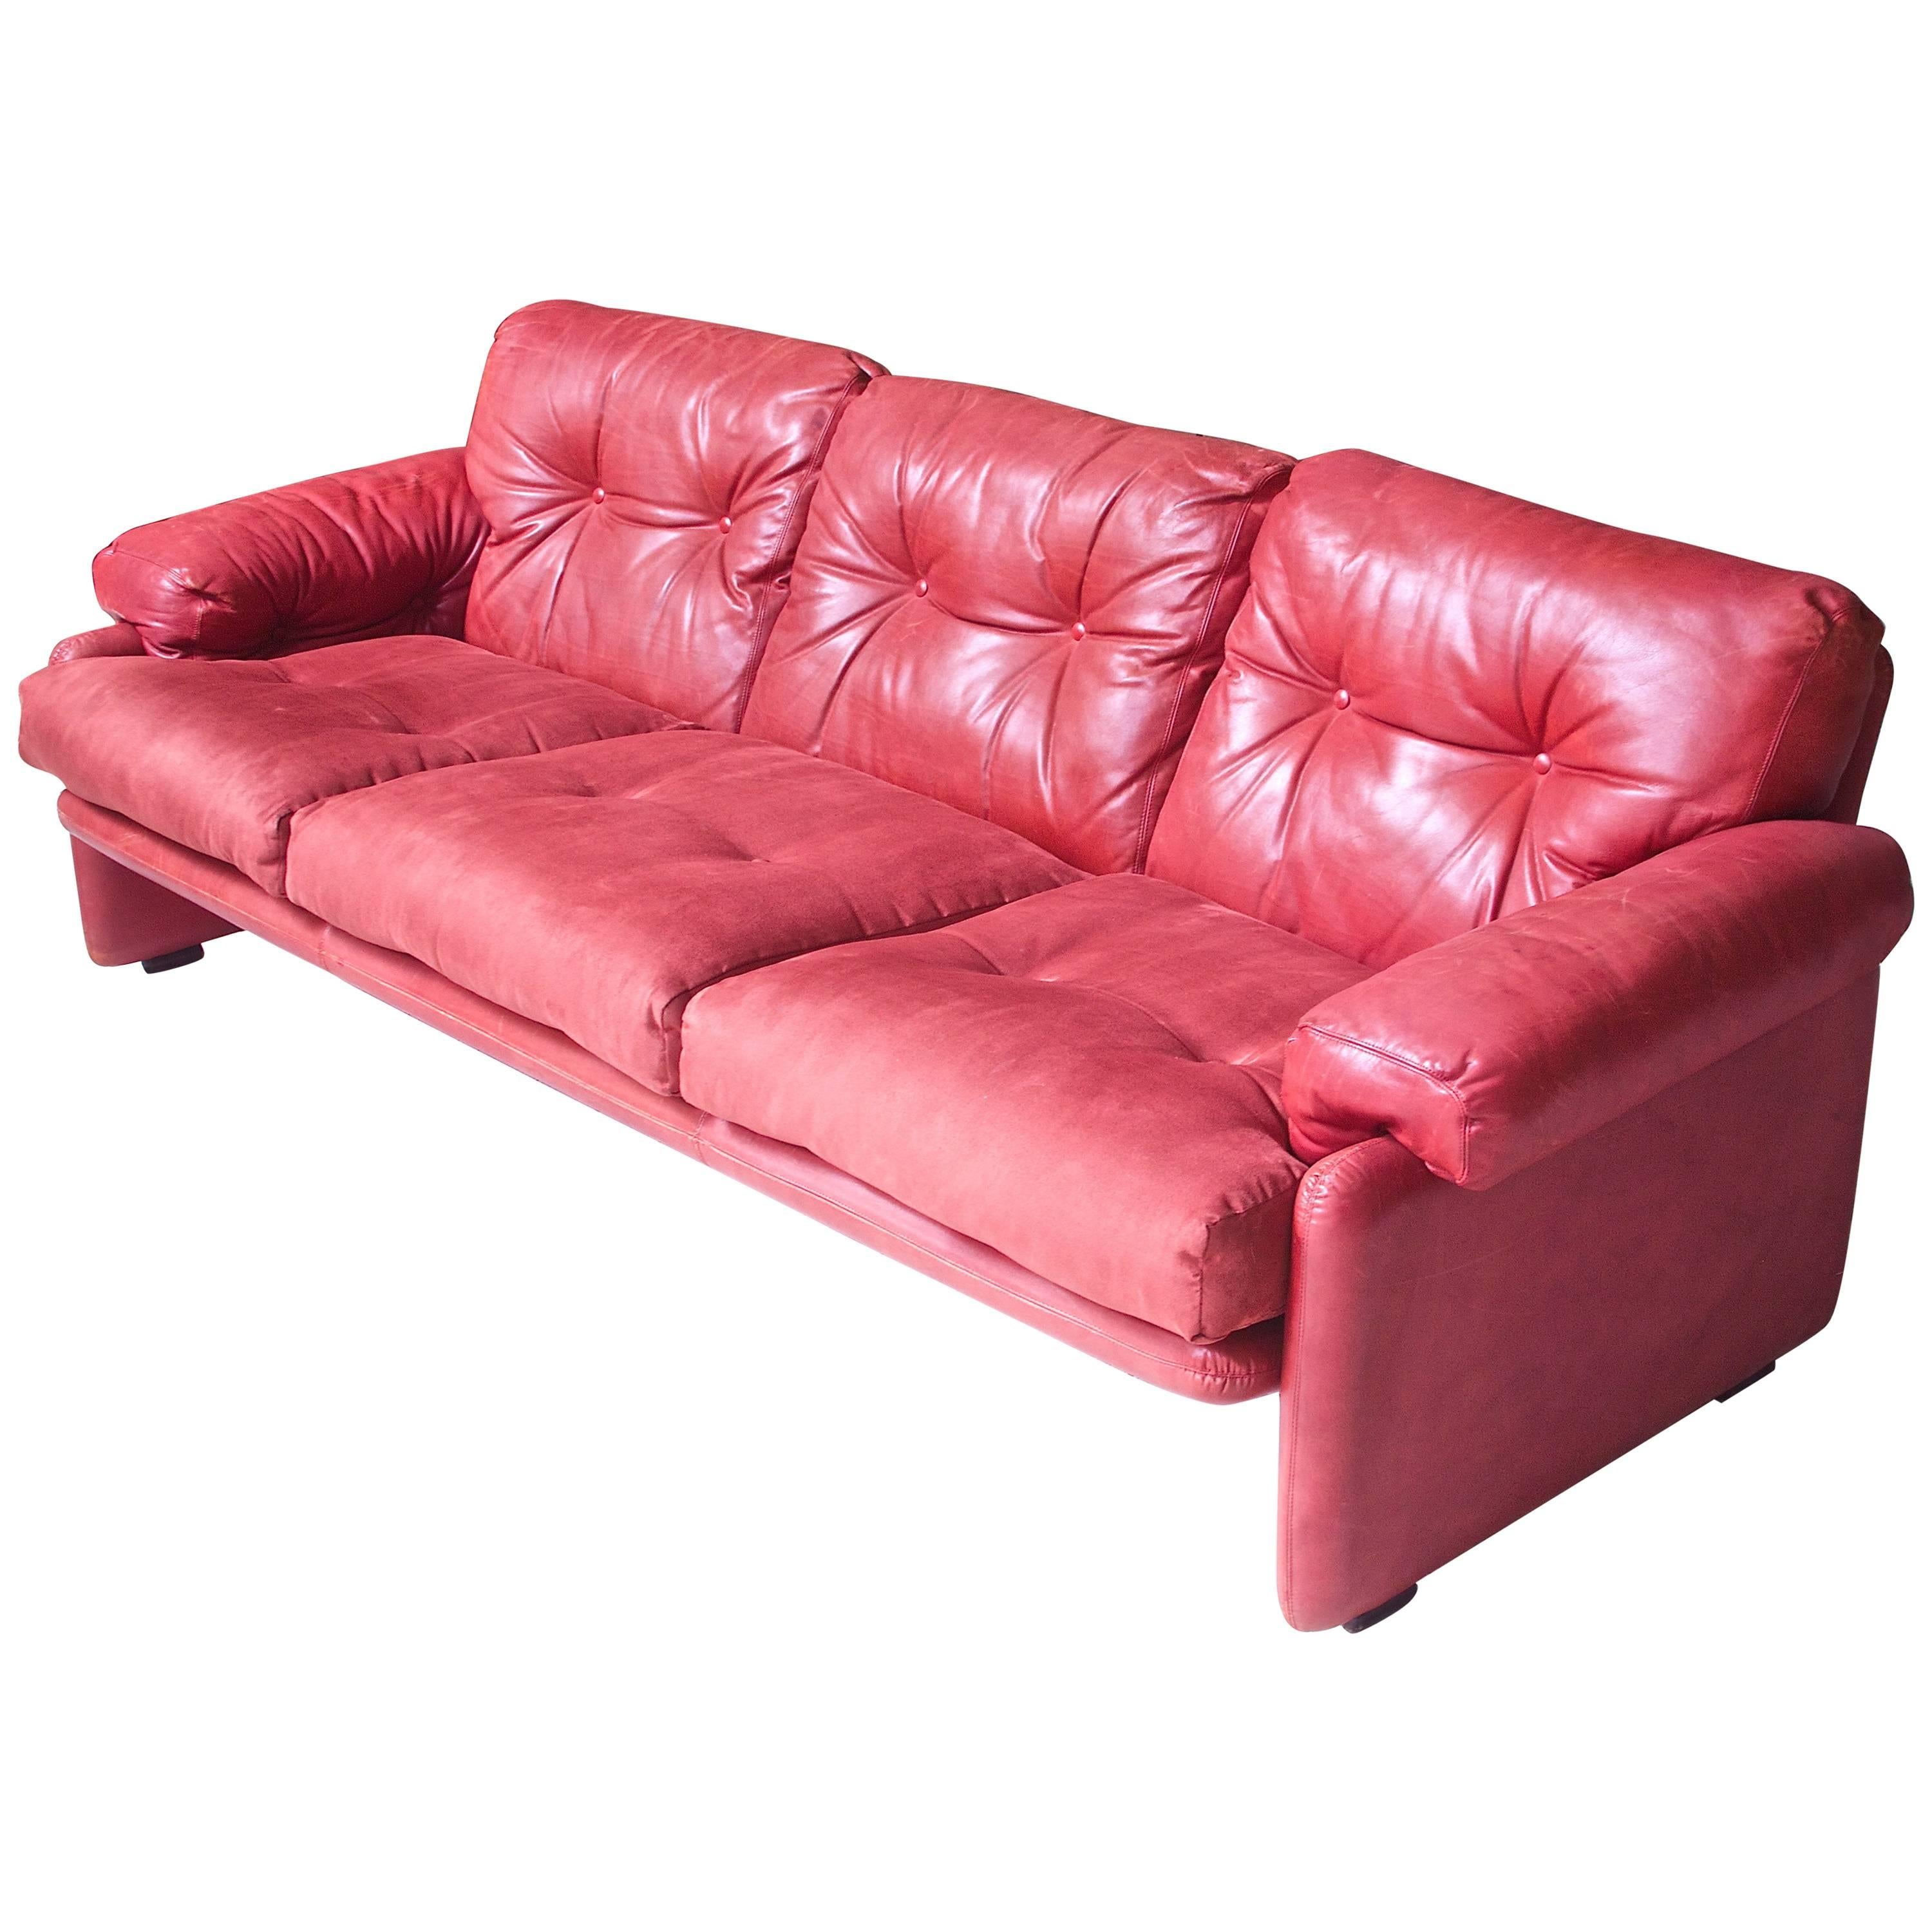 Vintage "Coronado" Sofa in Red Leather and Velvet by Tobia Scarpa, 1966